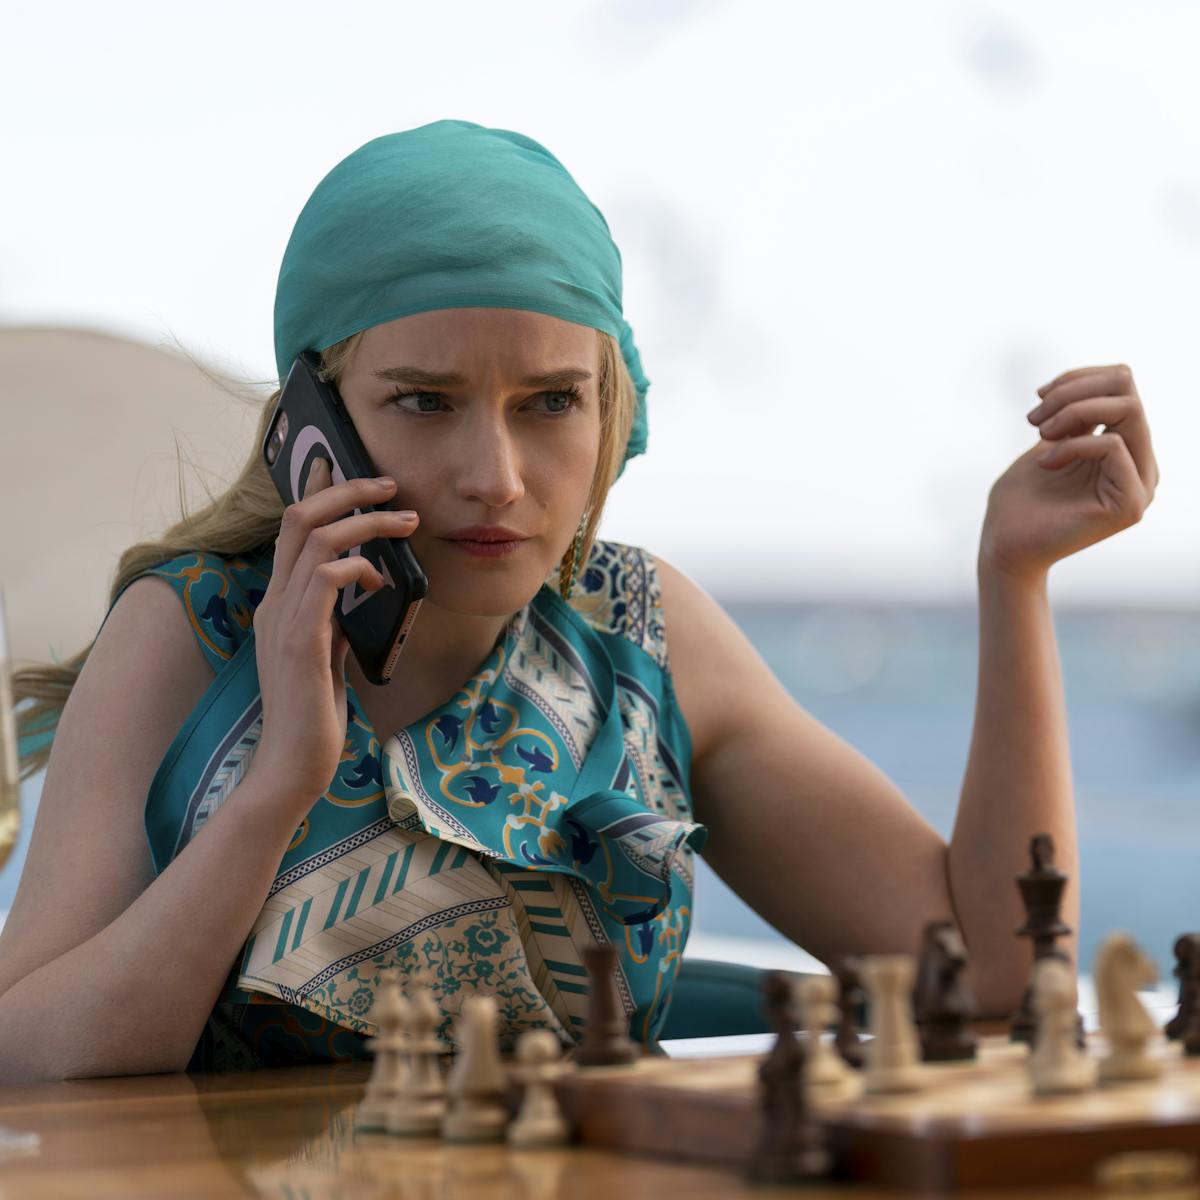 Anna Delvey, played by Julia Garner, wears a turquoise headscarf and patterned shirt. In front of her sits a chess board and a glass of champagne.